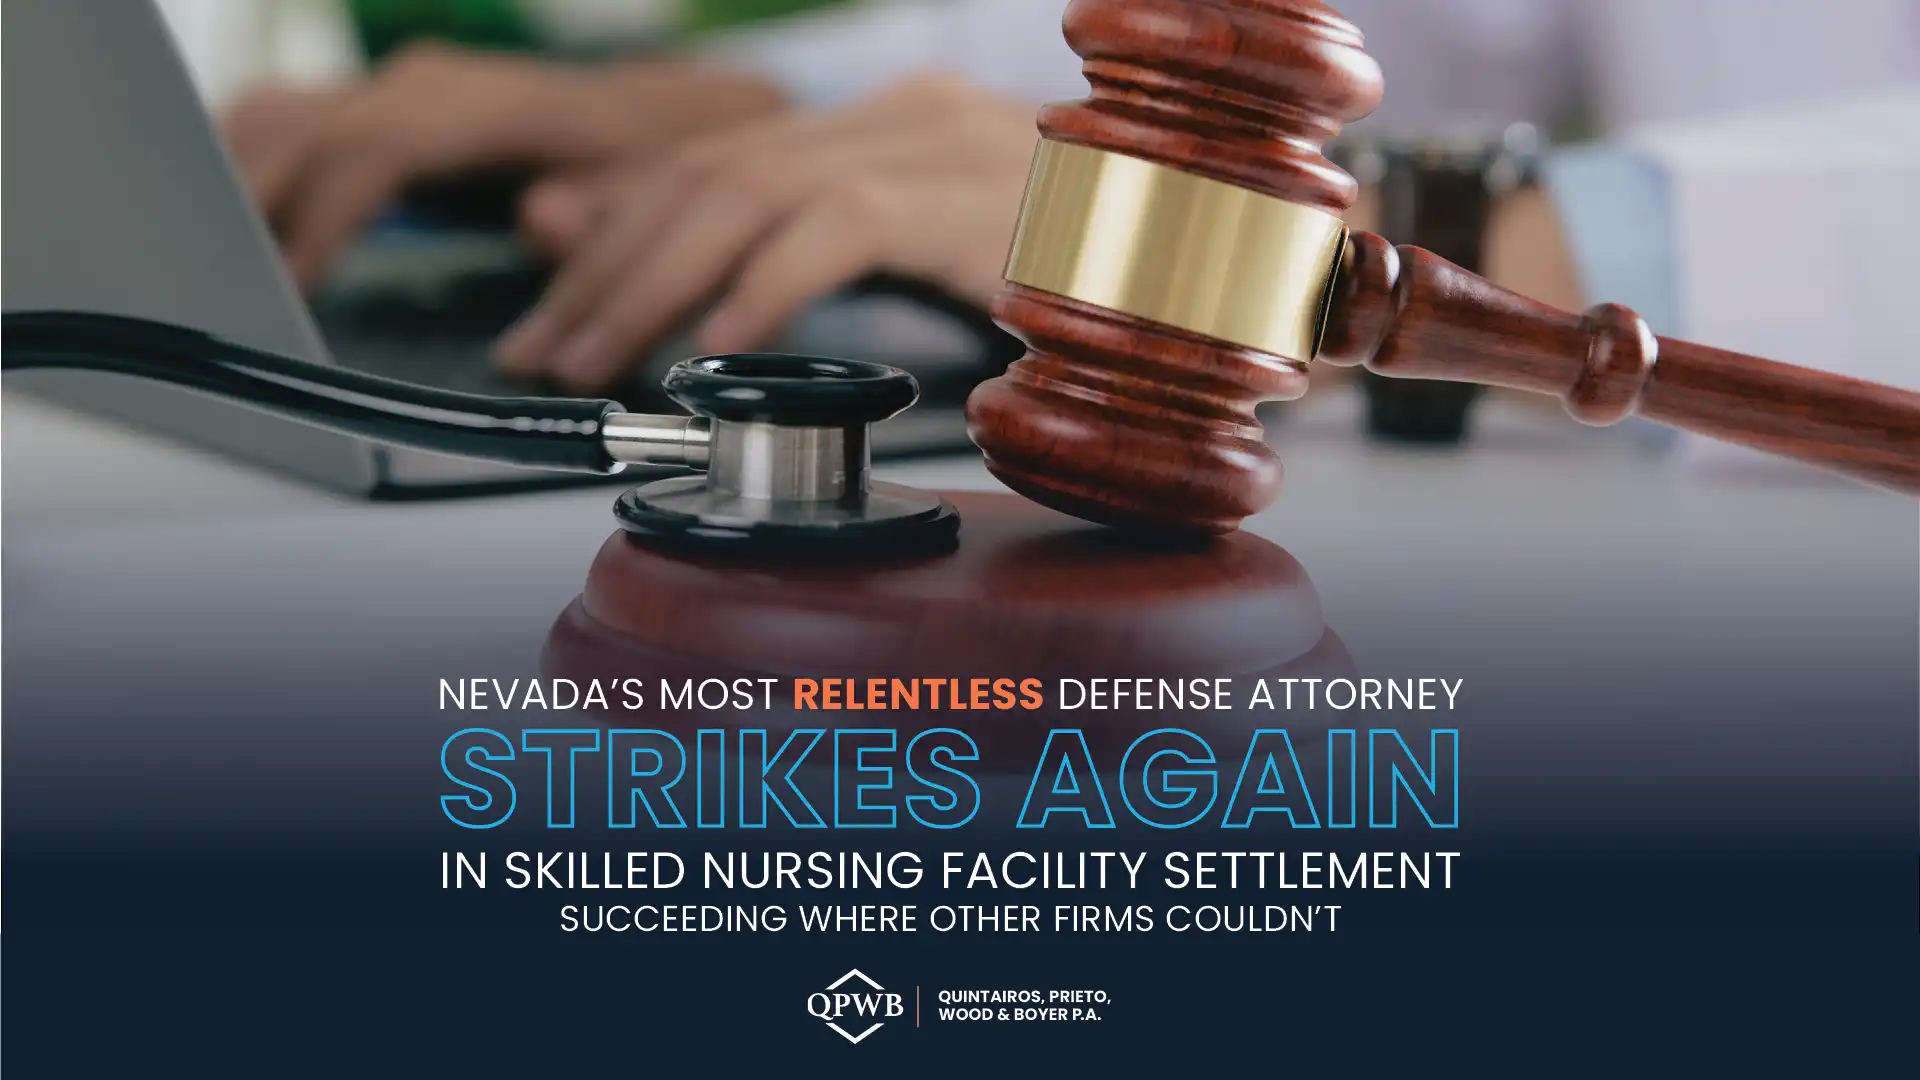 Nevada’s Most Relentless Defense Attorney Strikes Again in Skilled Nursing Facility Settlement Judgement Succeeding Where Other Firms Couldn’t